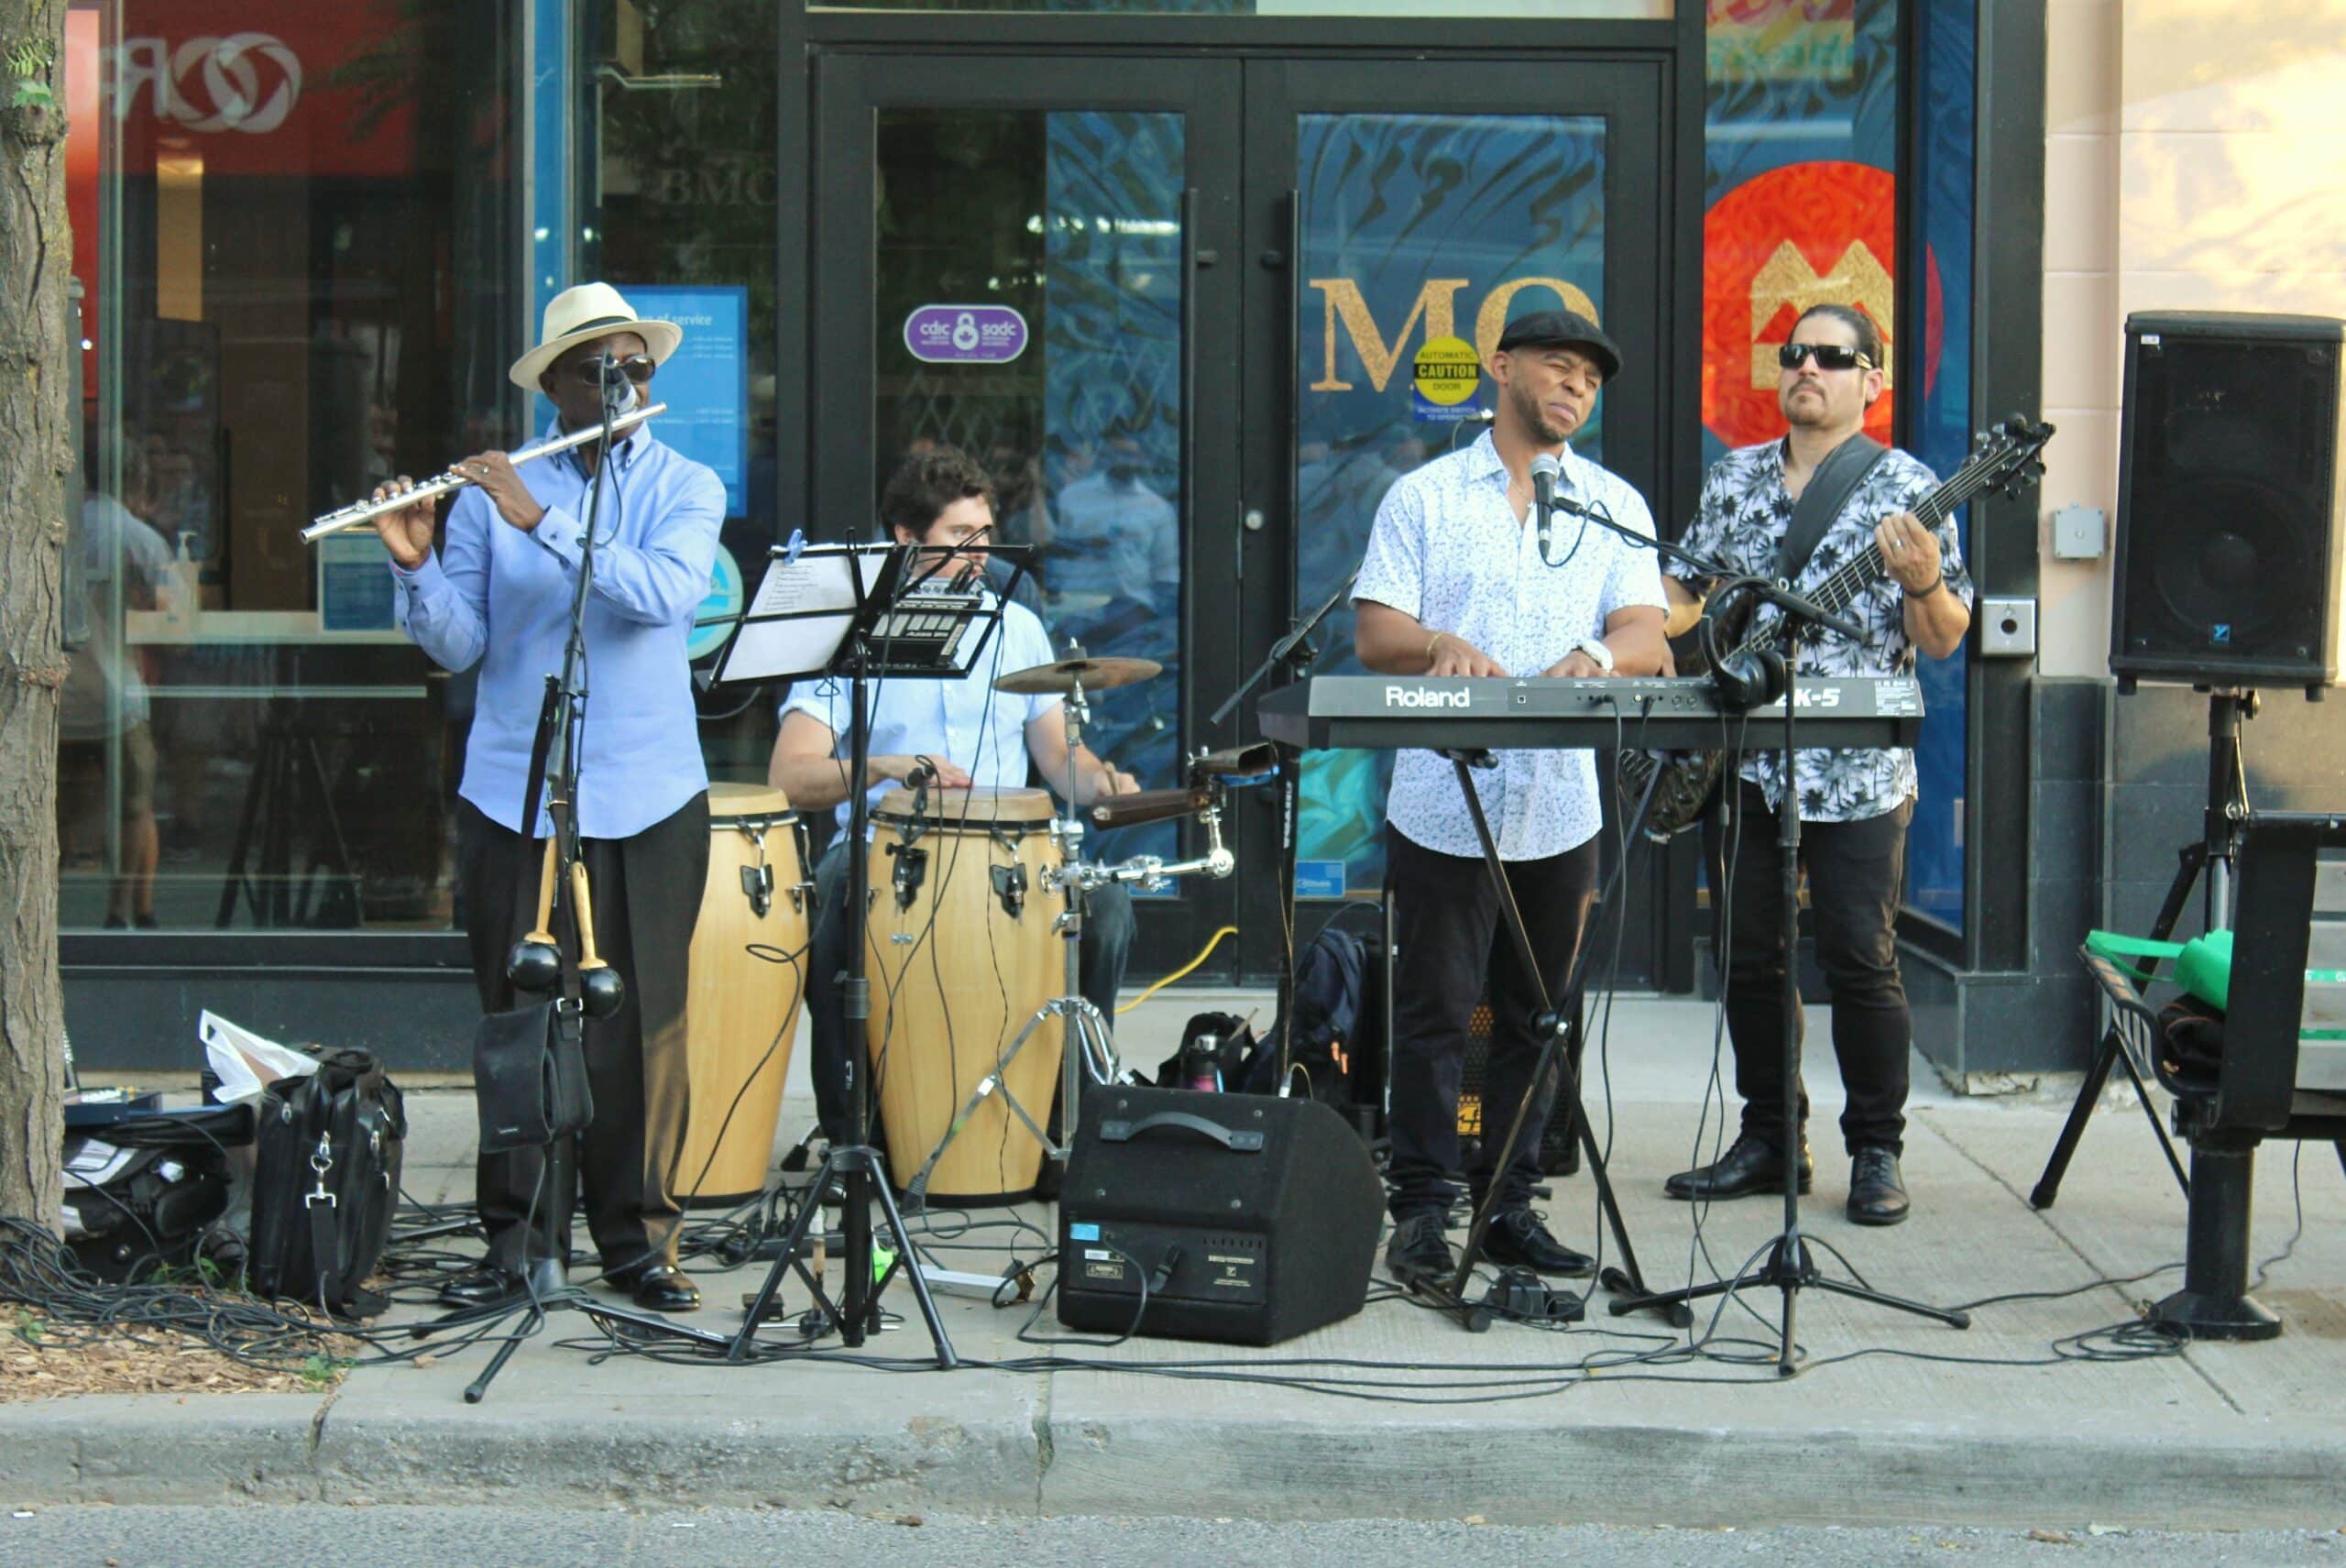 Jazz musicians play on the street